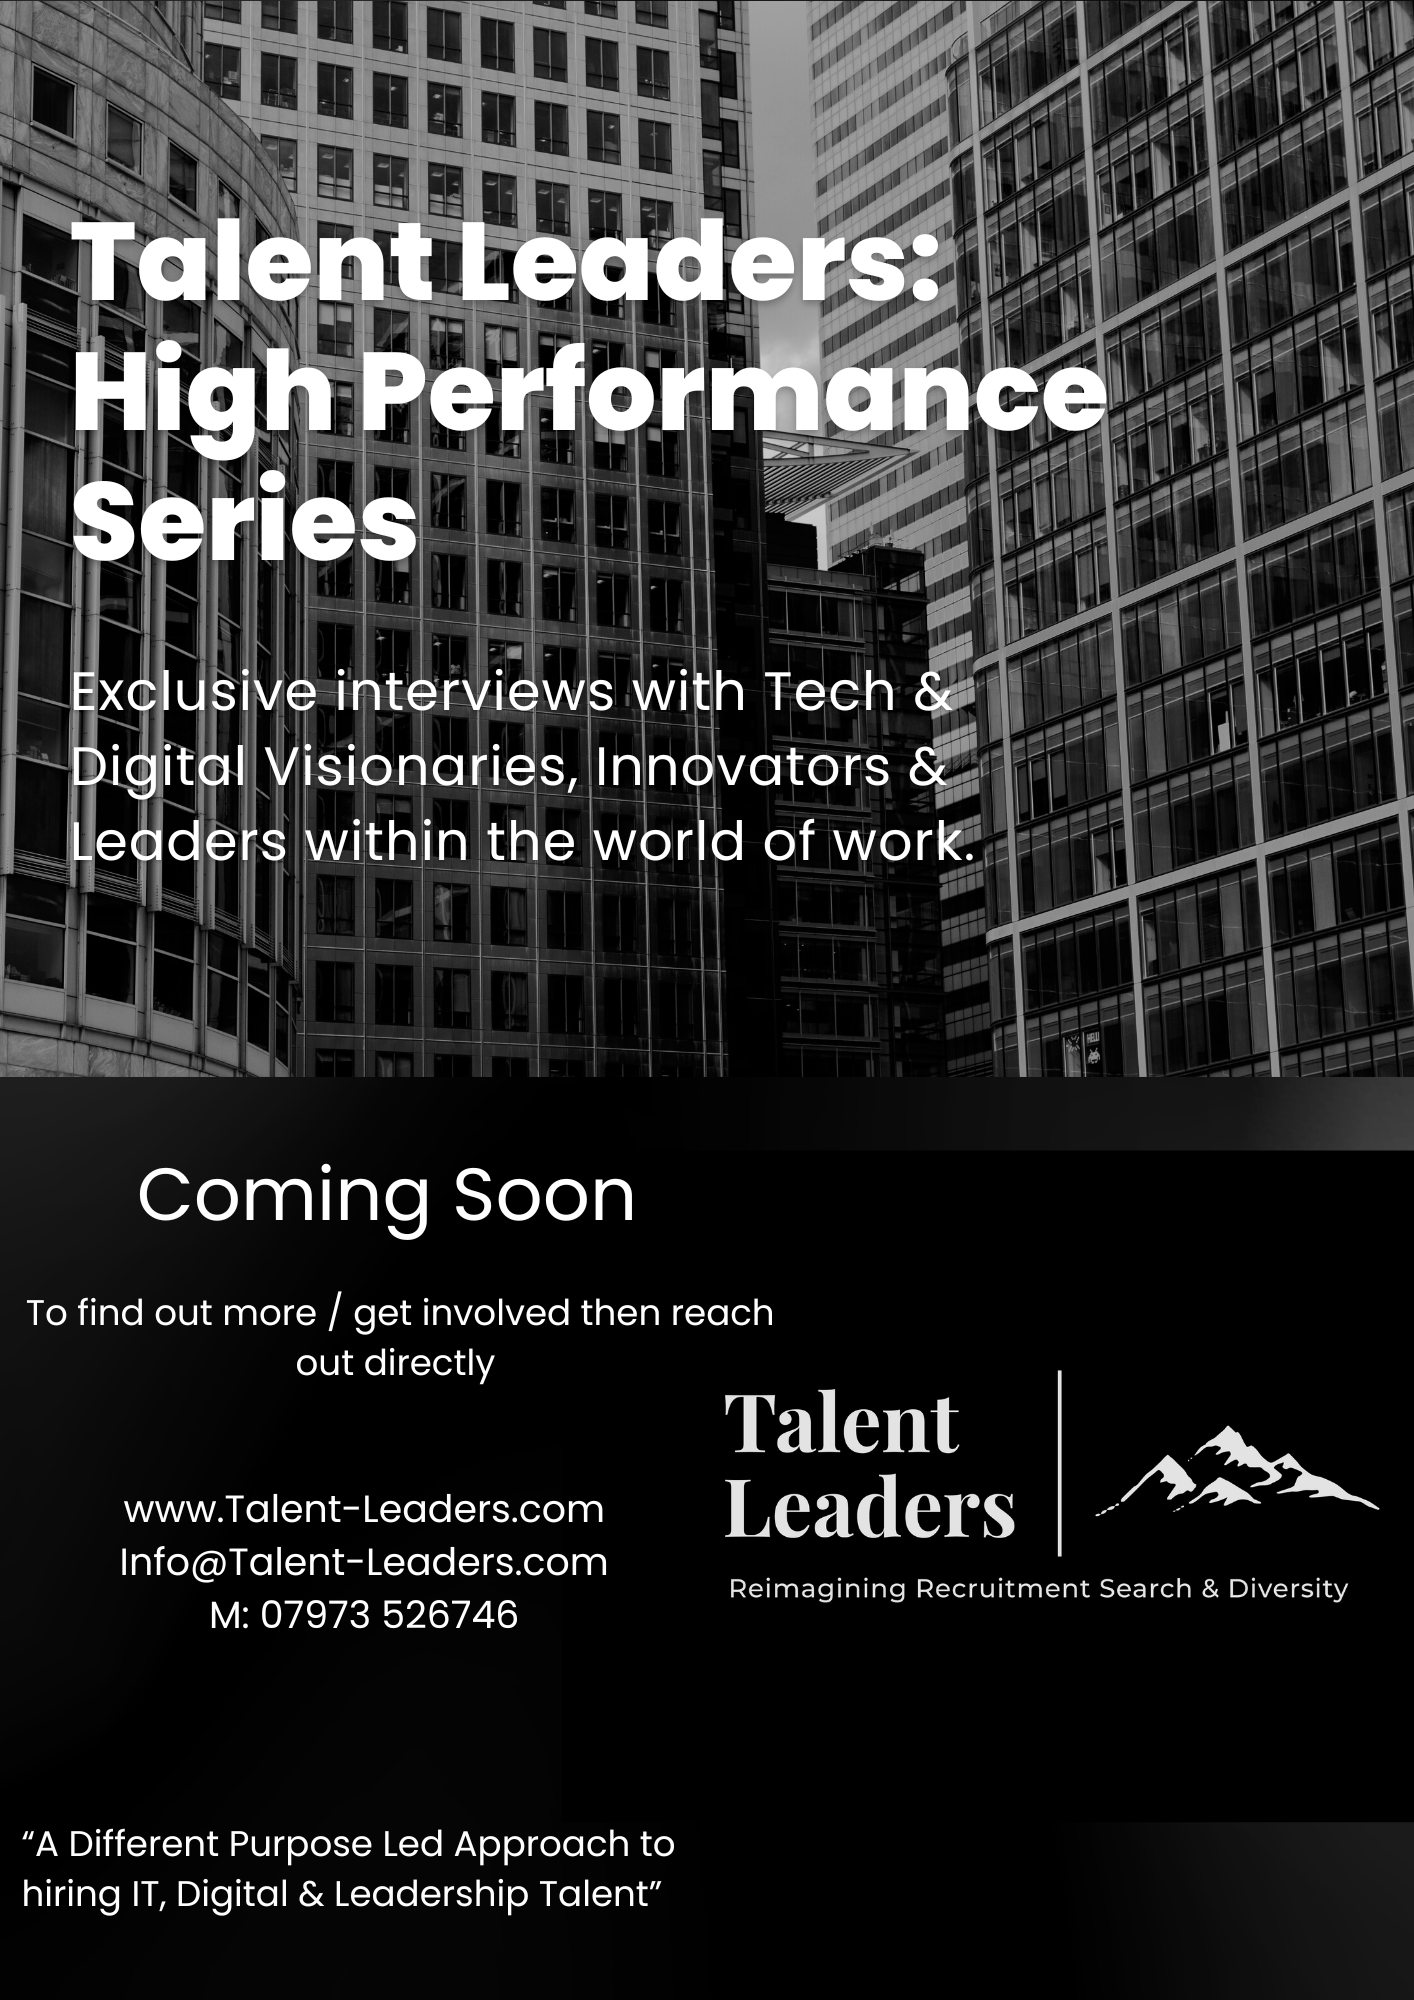 Talent Leaders - High Performance Interview Series